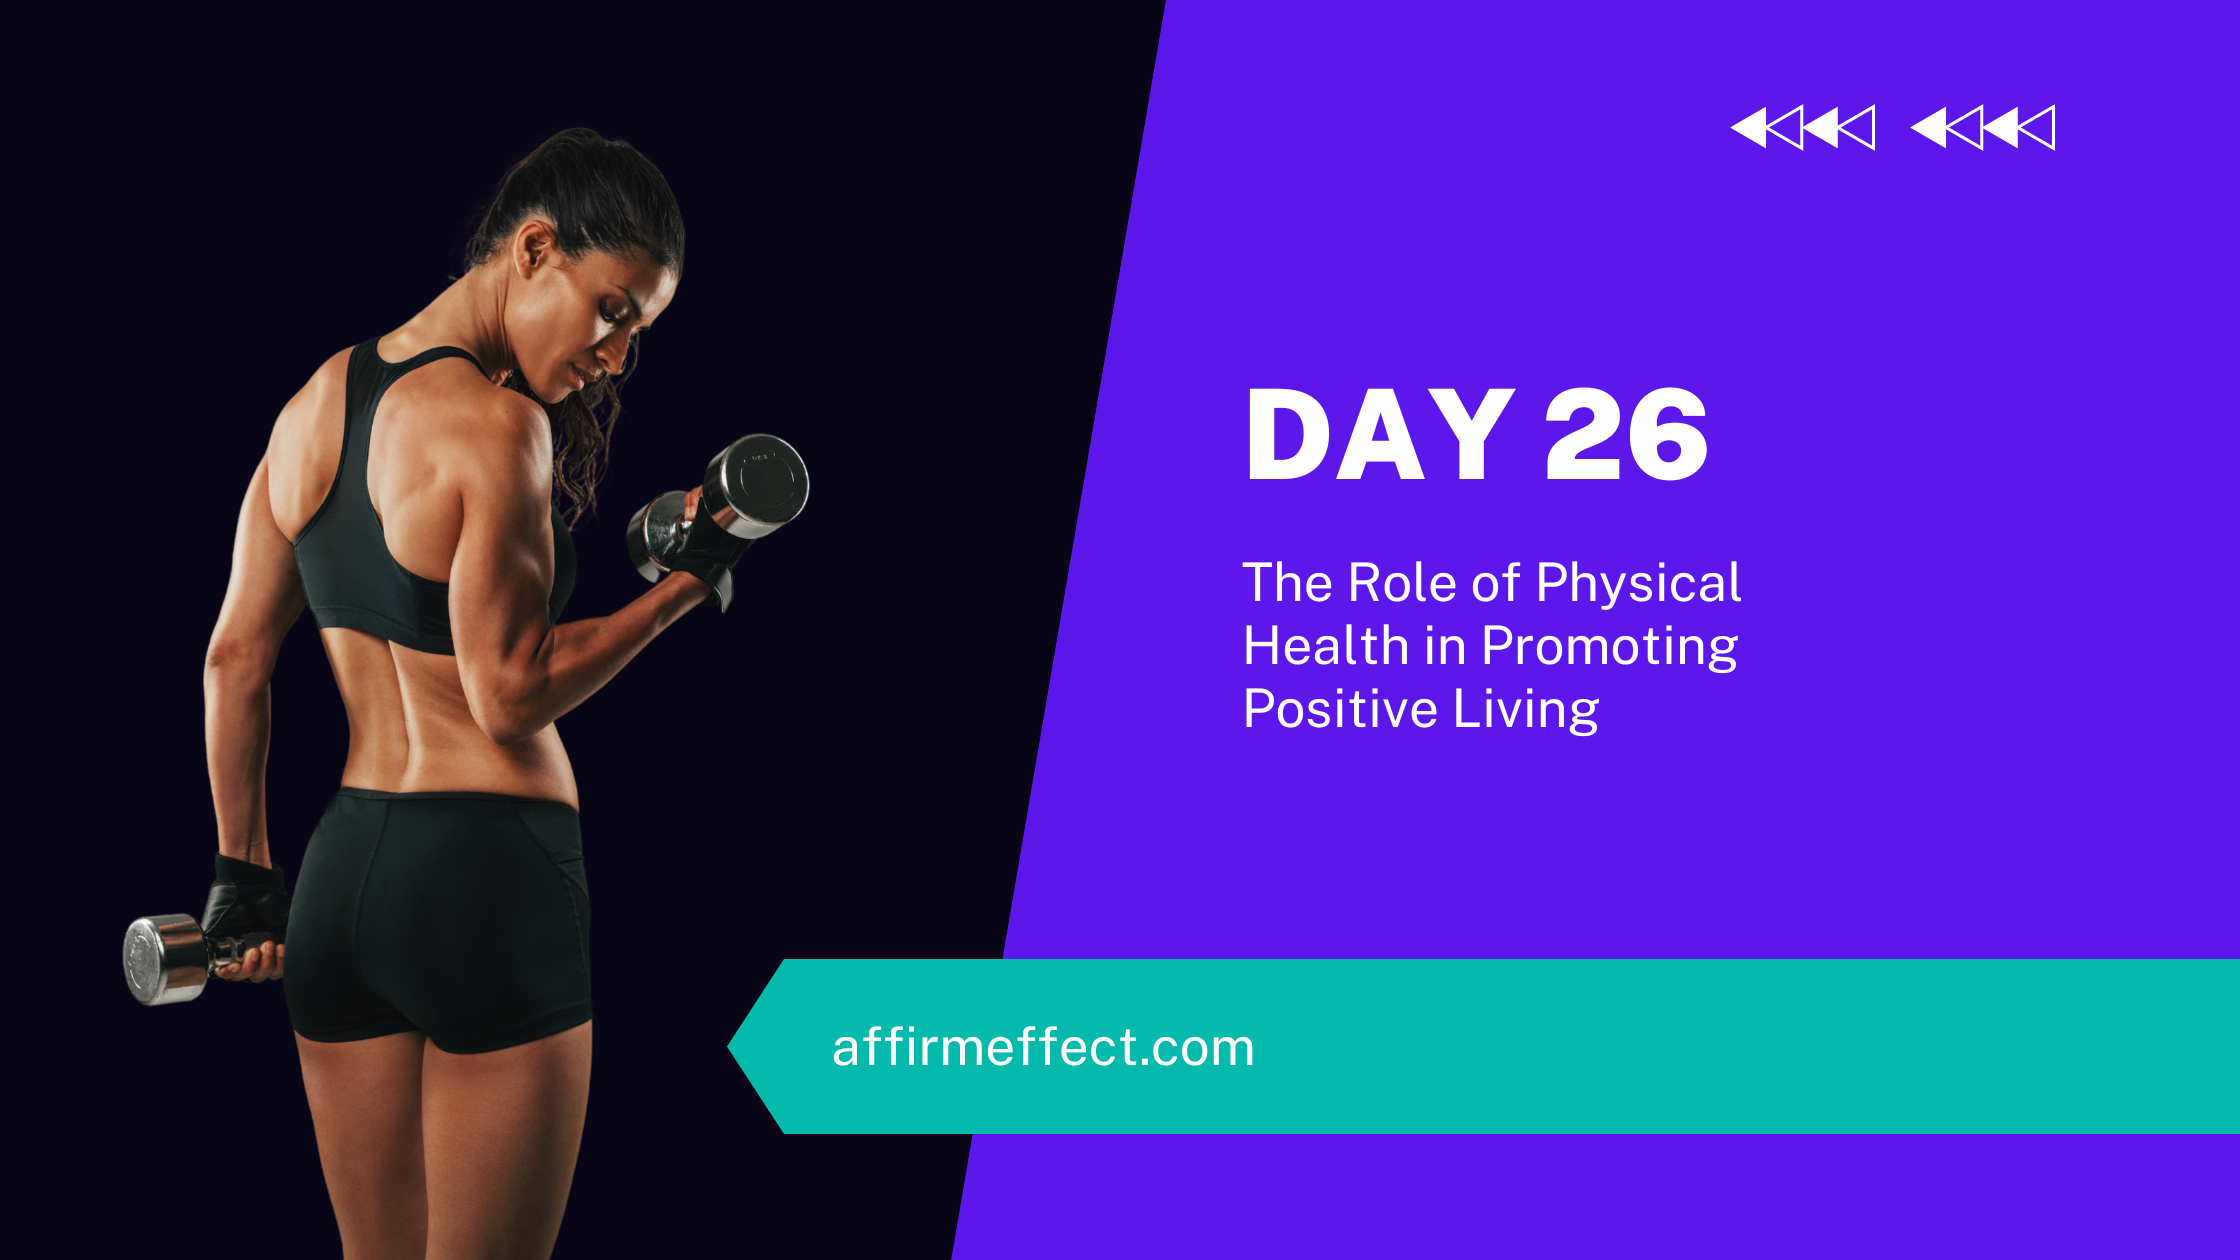 Day 26: The Role of Physical Health in Promoting Positive Living